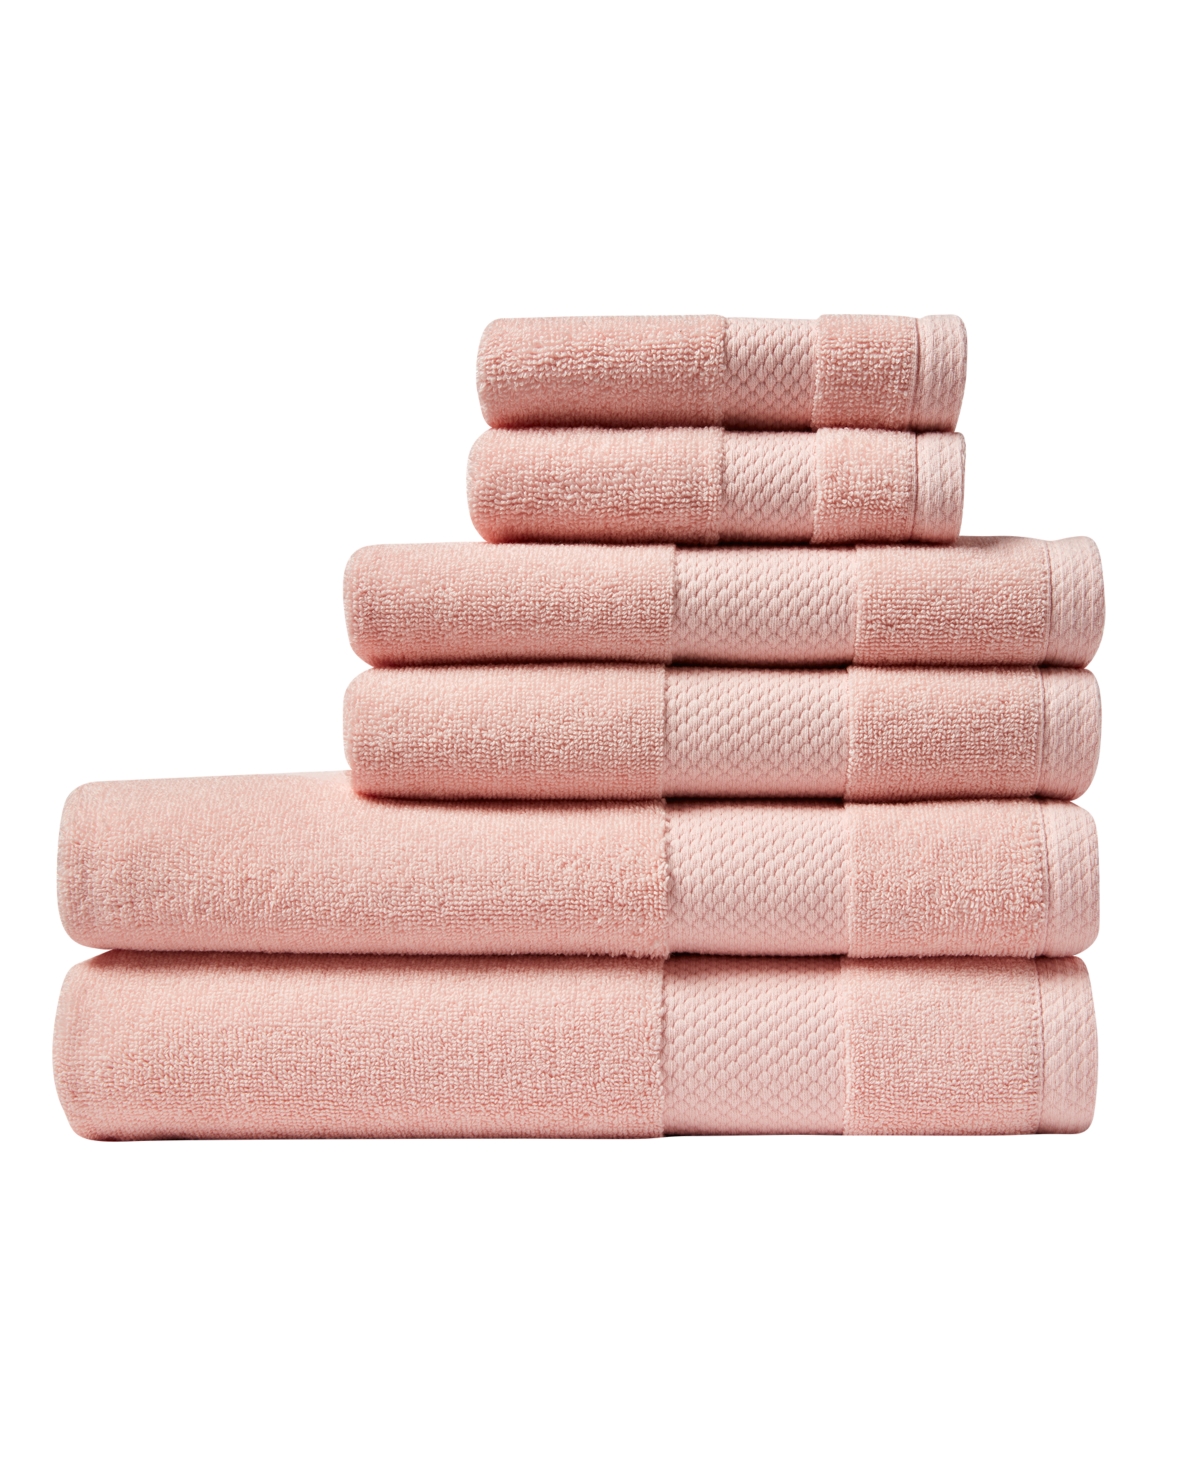 Lacoste Heritage Anti-microbial Supima Cotton 6 Piece Bundle Towel Set In Lt Pink